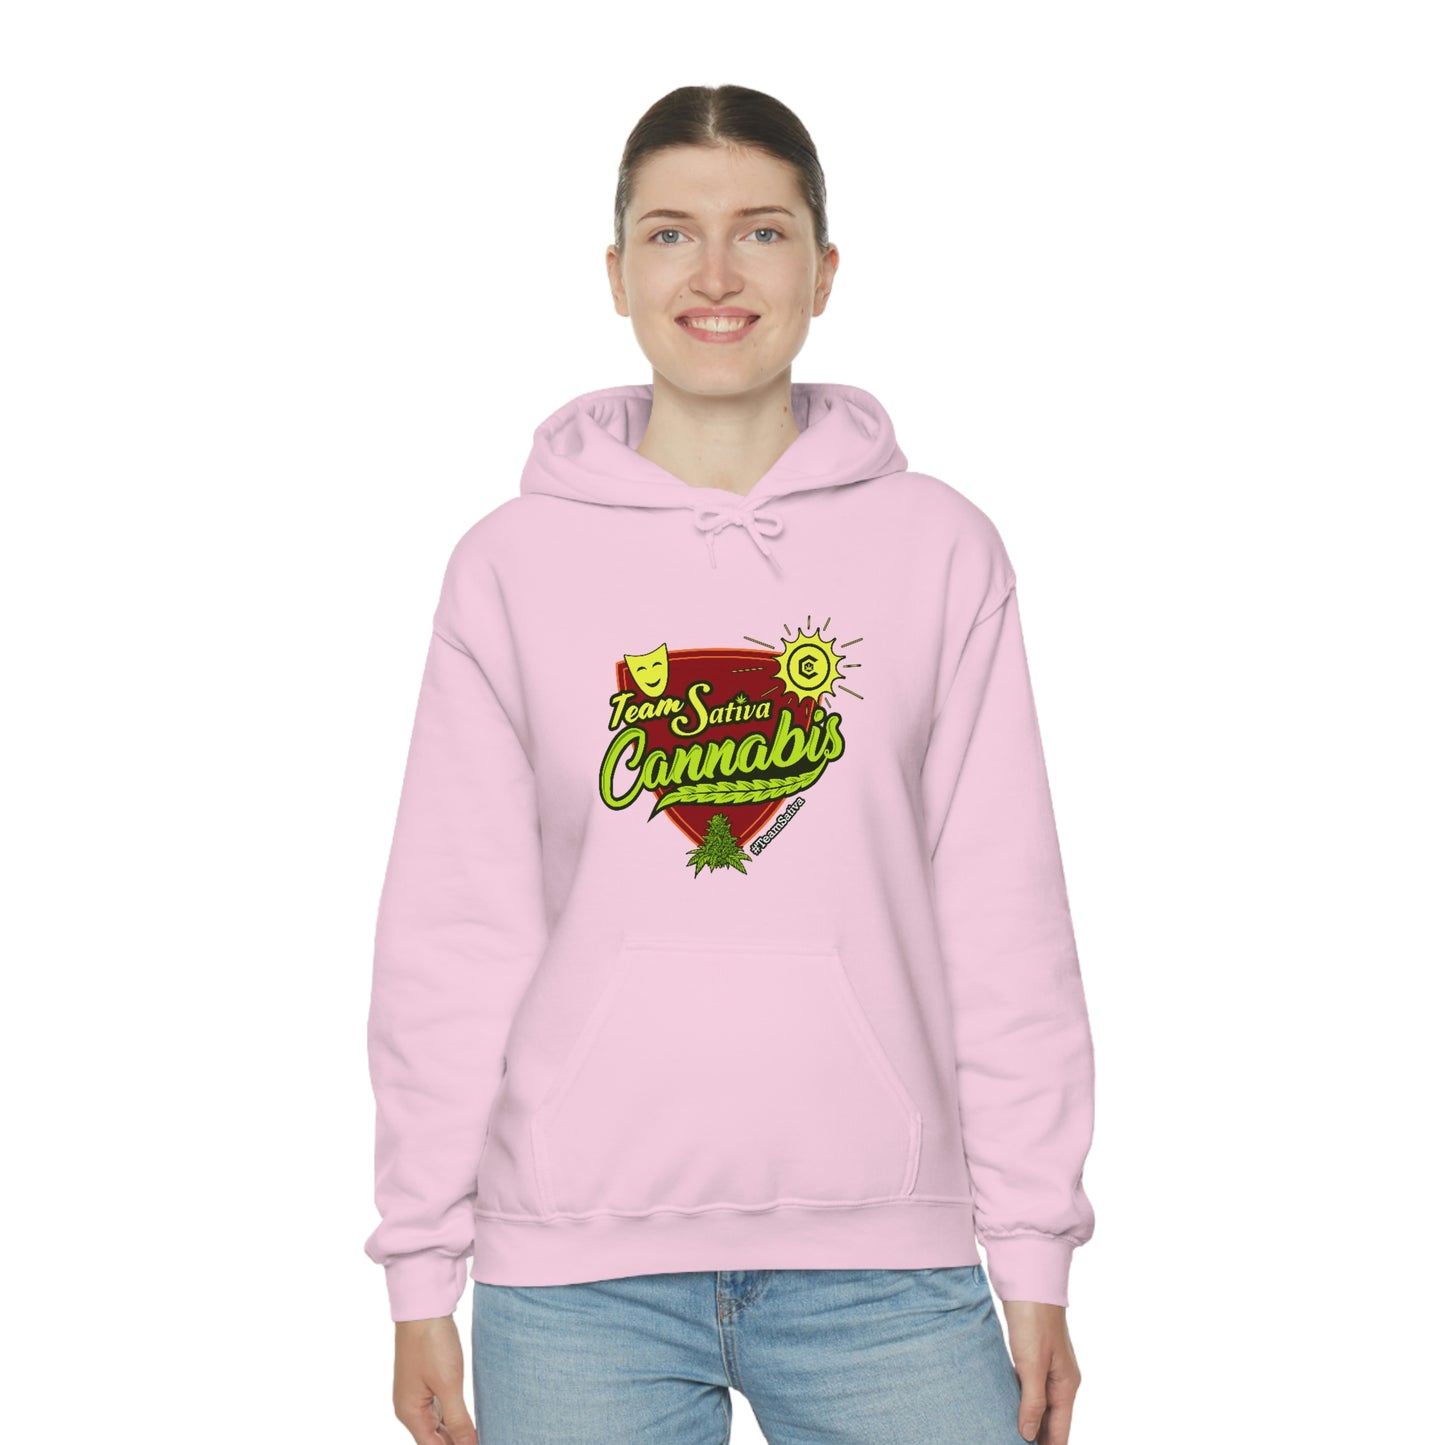 a woman wearing a pink hooded Team Sativa Stoner Sweatshirt with the word 'grandma' on it.